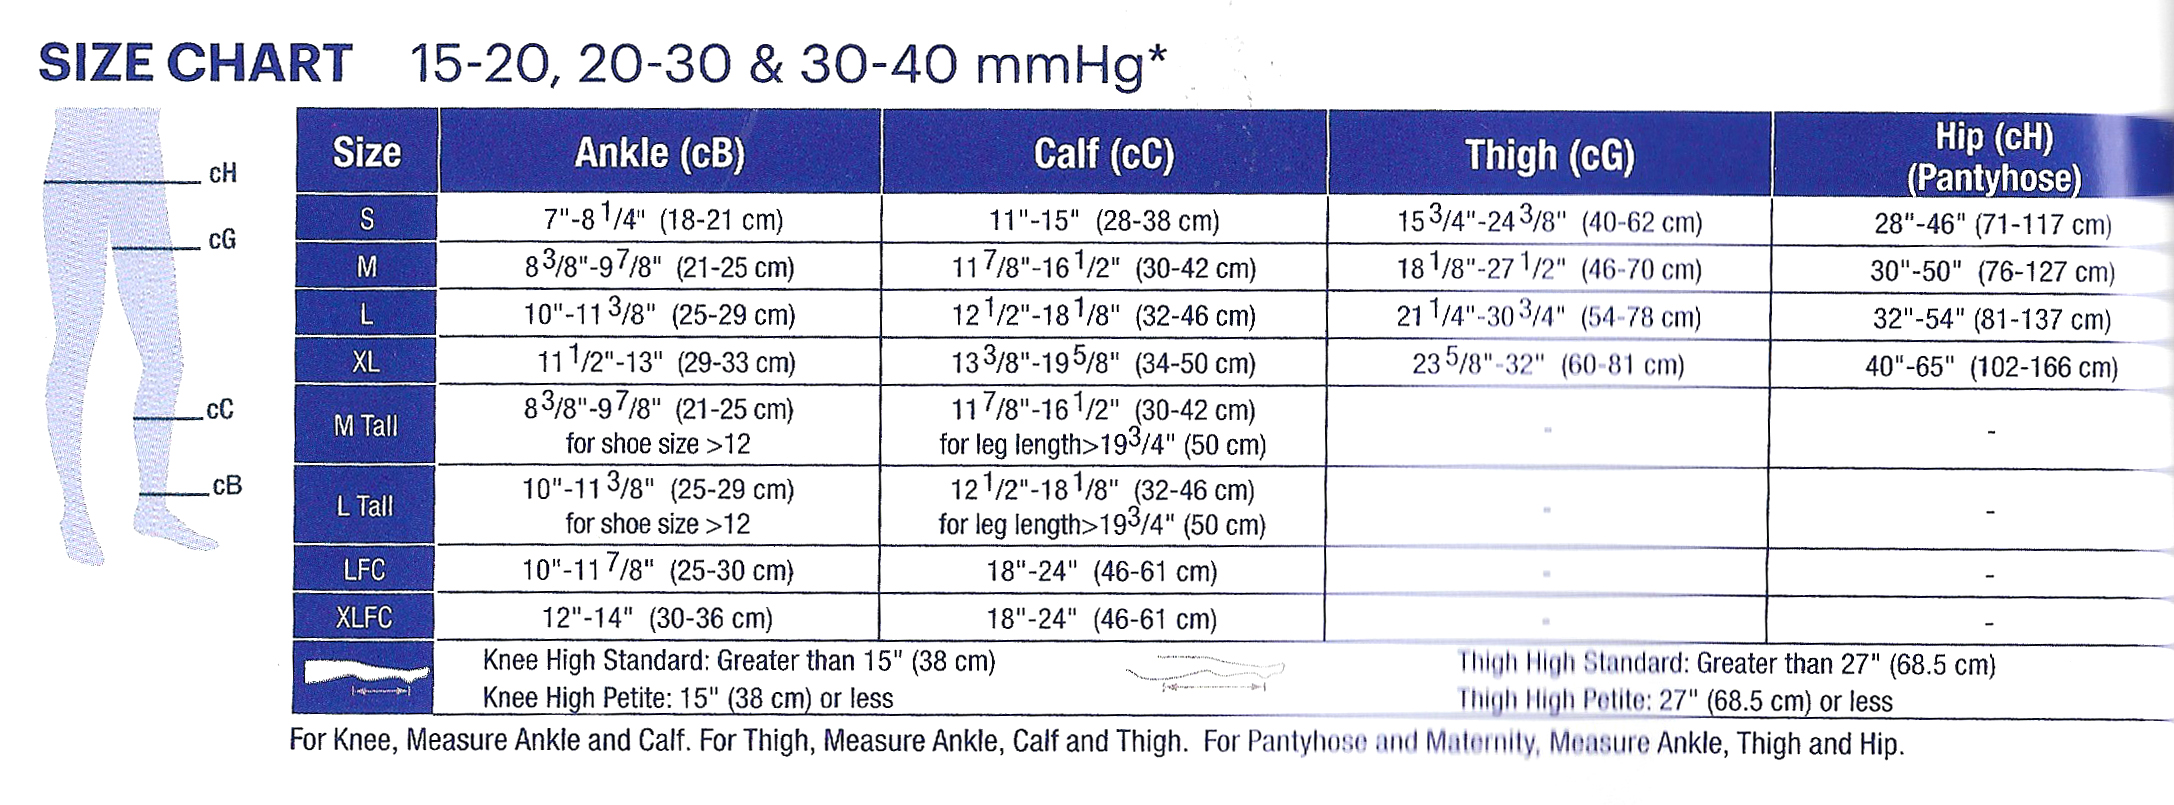 Jobst opaque Knee High Compression Stockings Size Chart